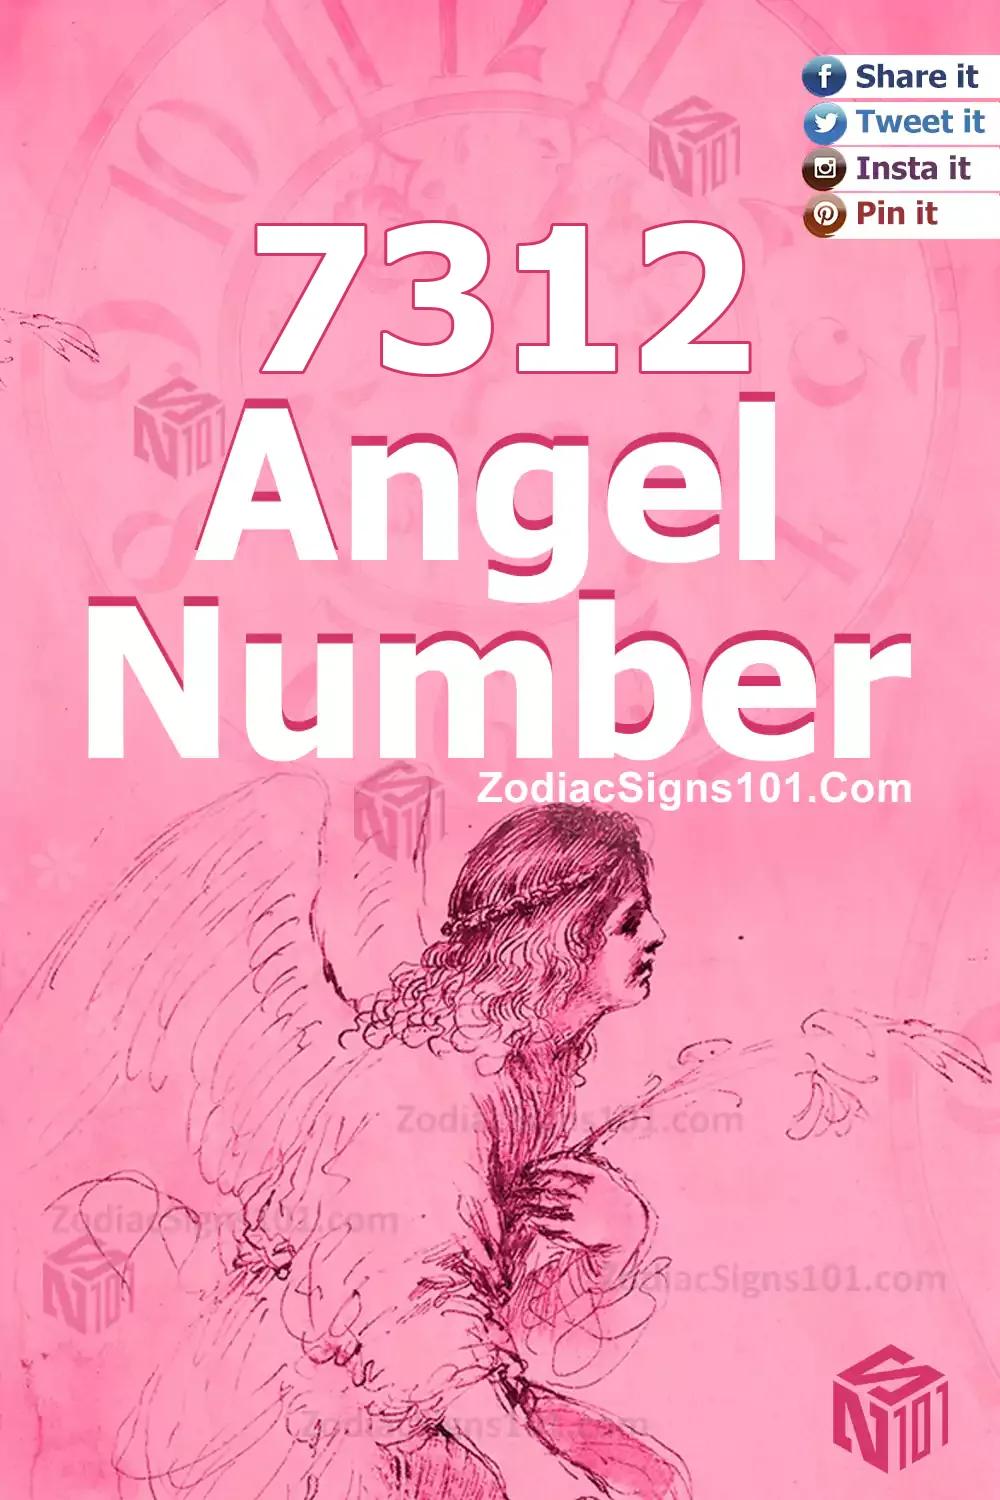 7312 Angel Number Meaning